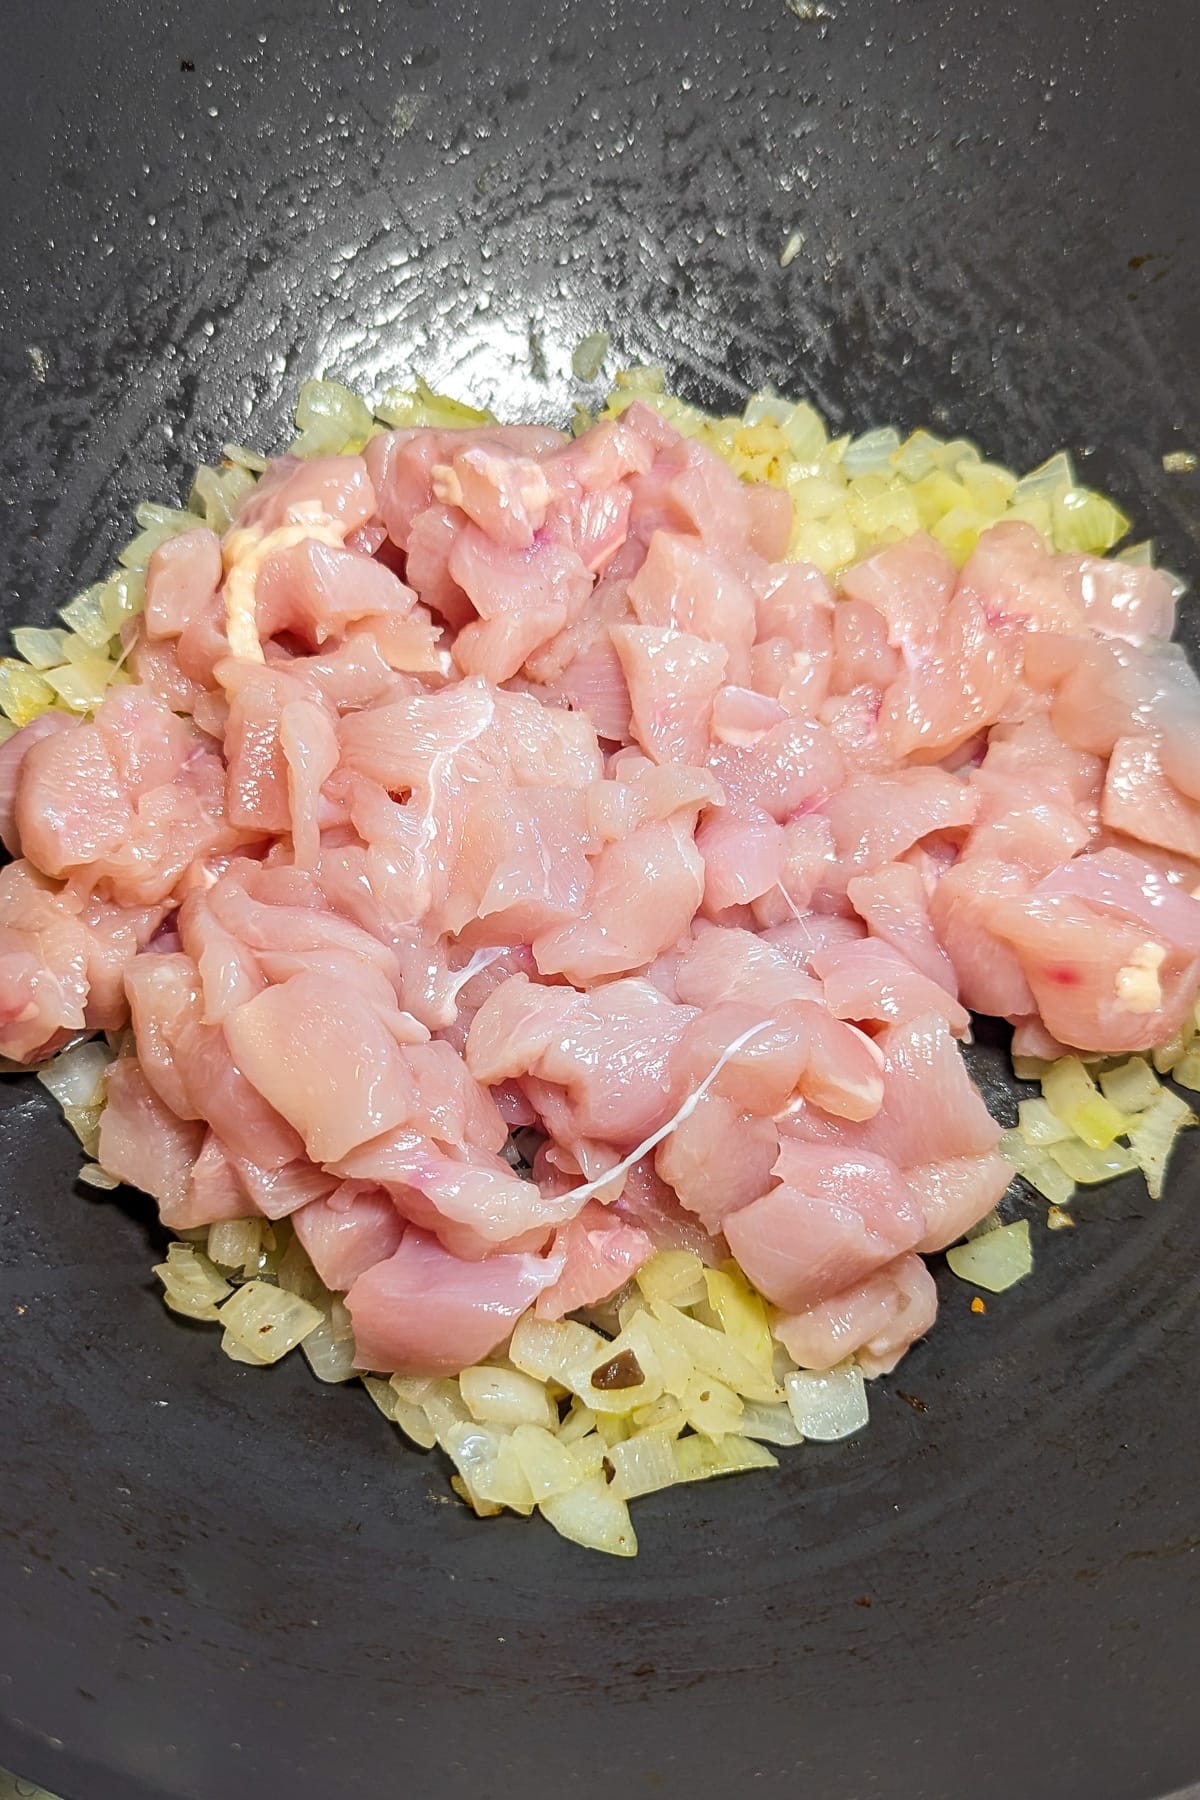 Raw chicken breasts over caramelized onions in a wok.